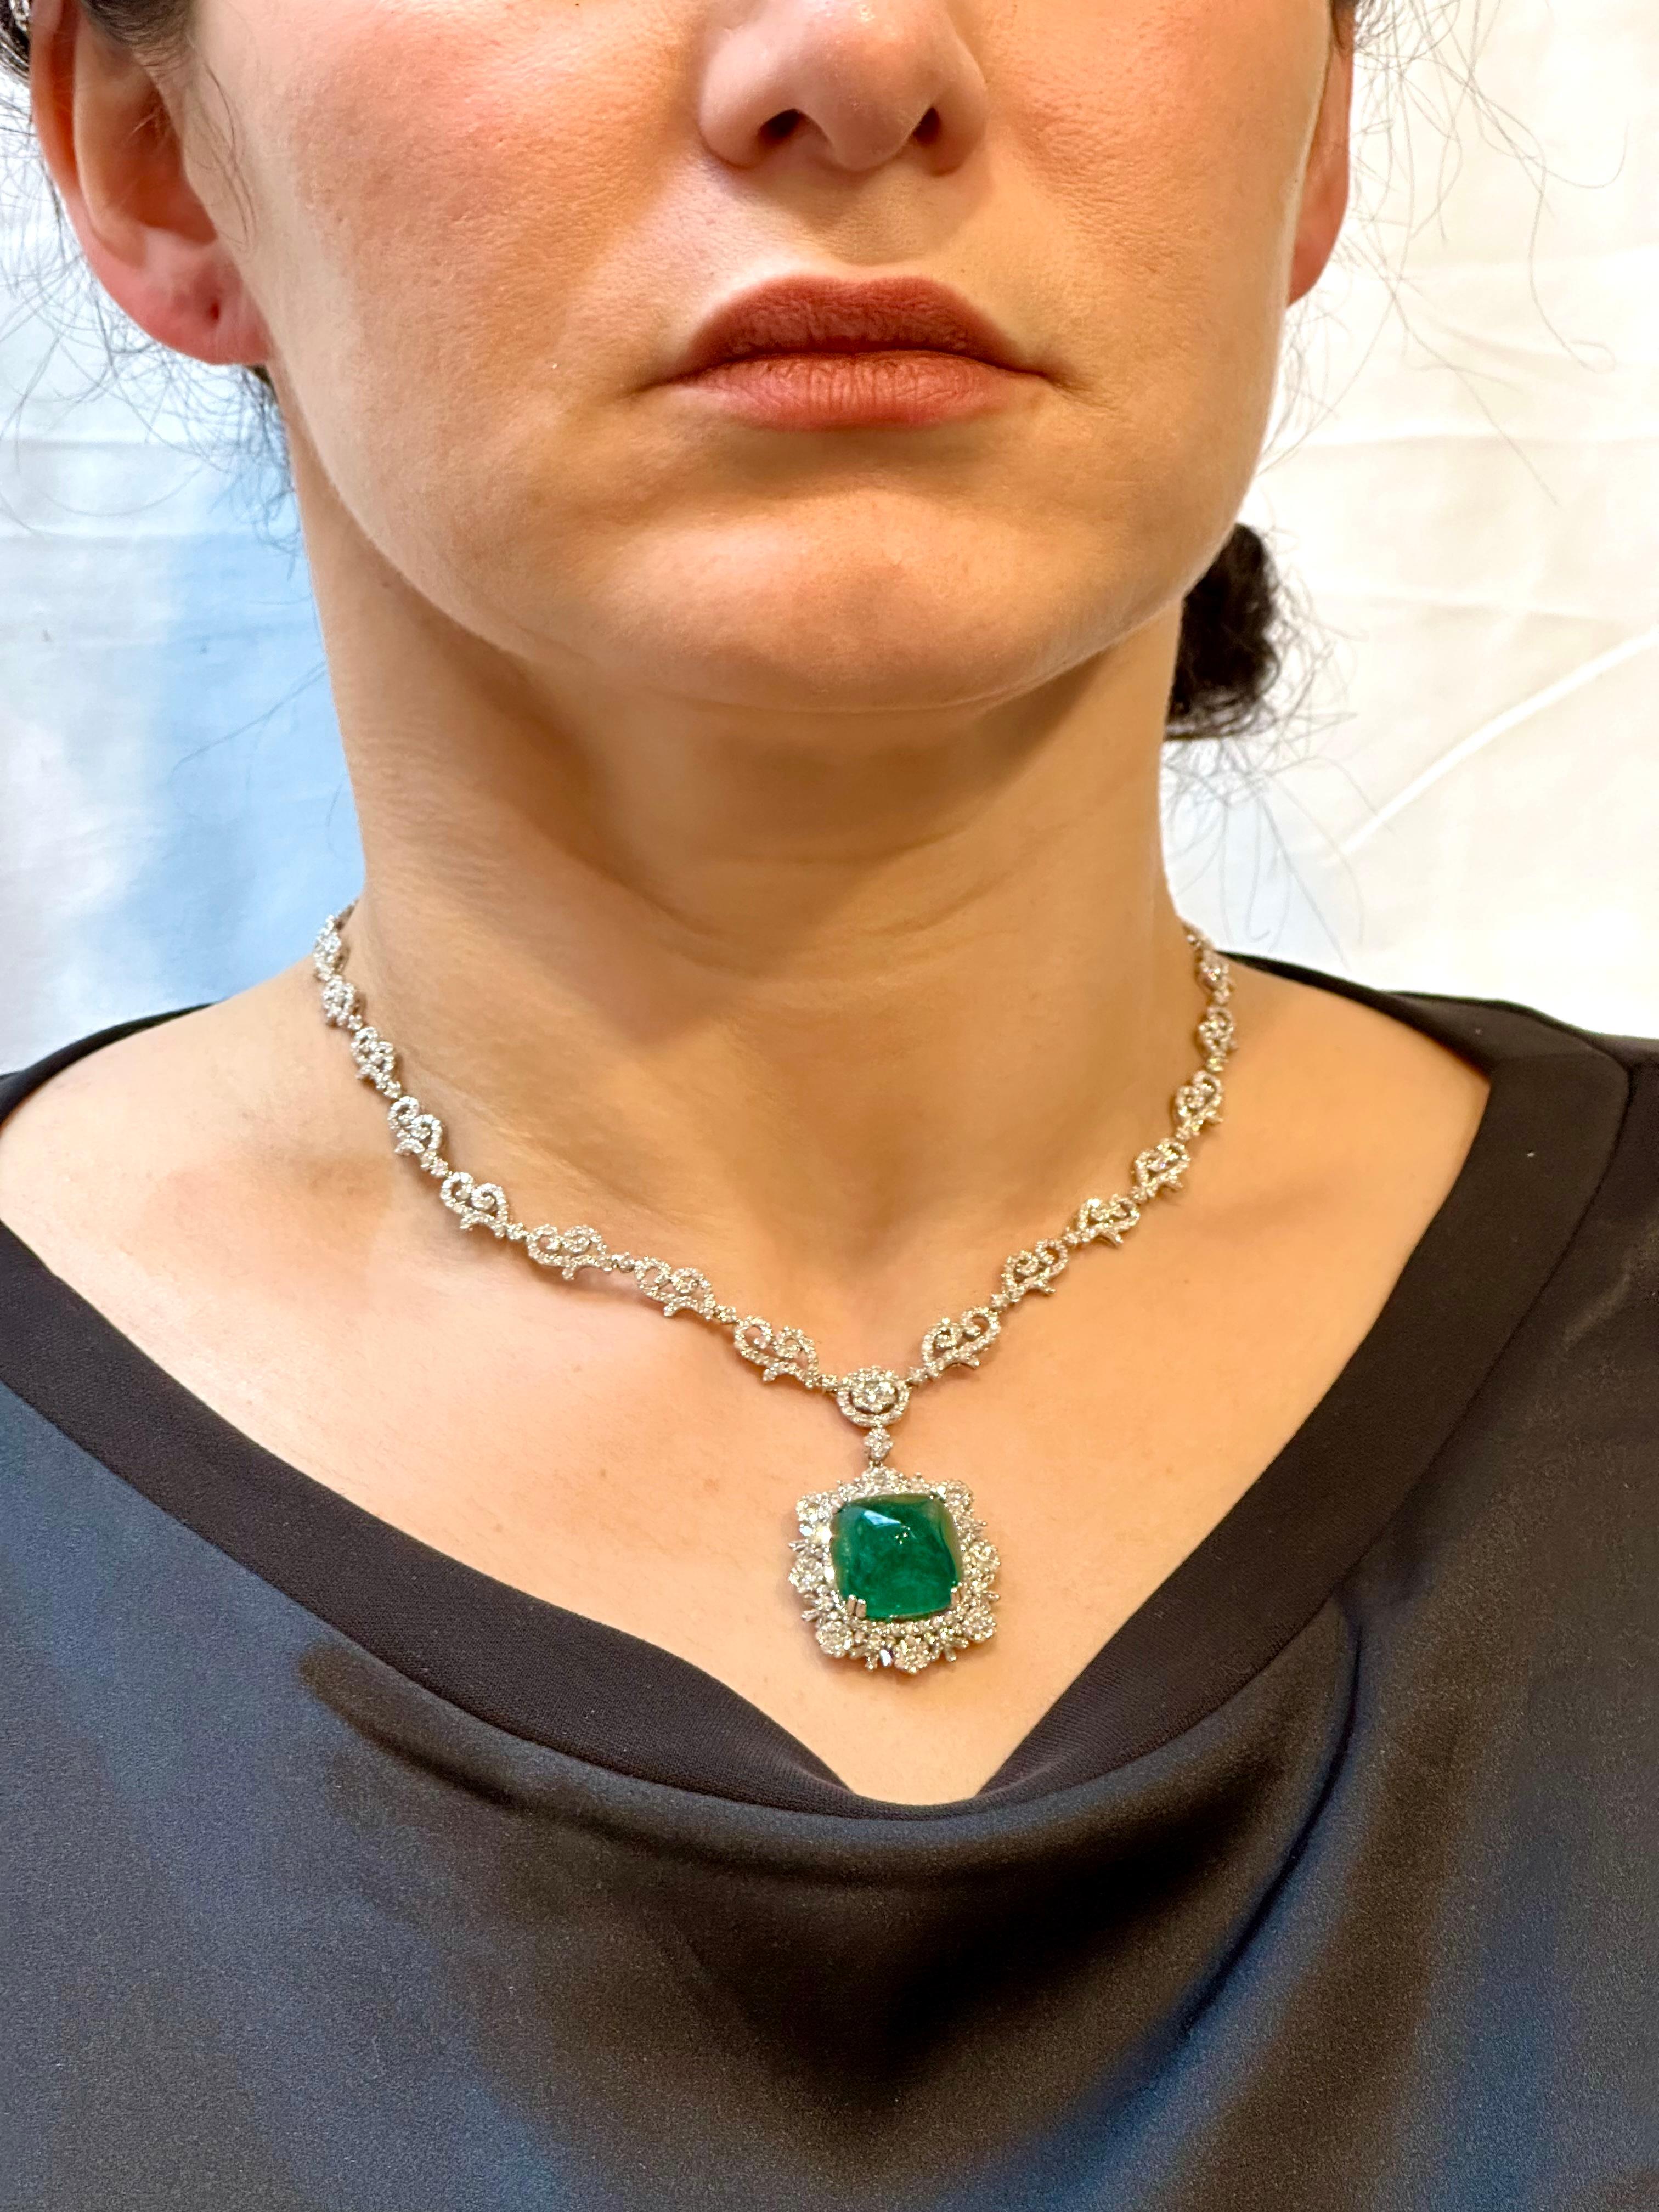 GIA 17 Ct Sugar Loaf Cabochon Colombian Emerald & 13 Ct Diamond Necklace 18KWG For Sale 5